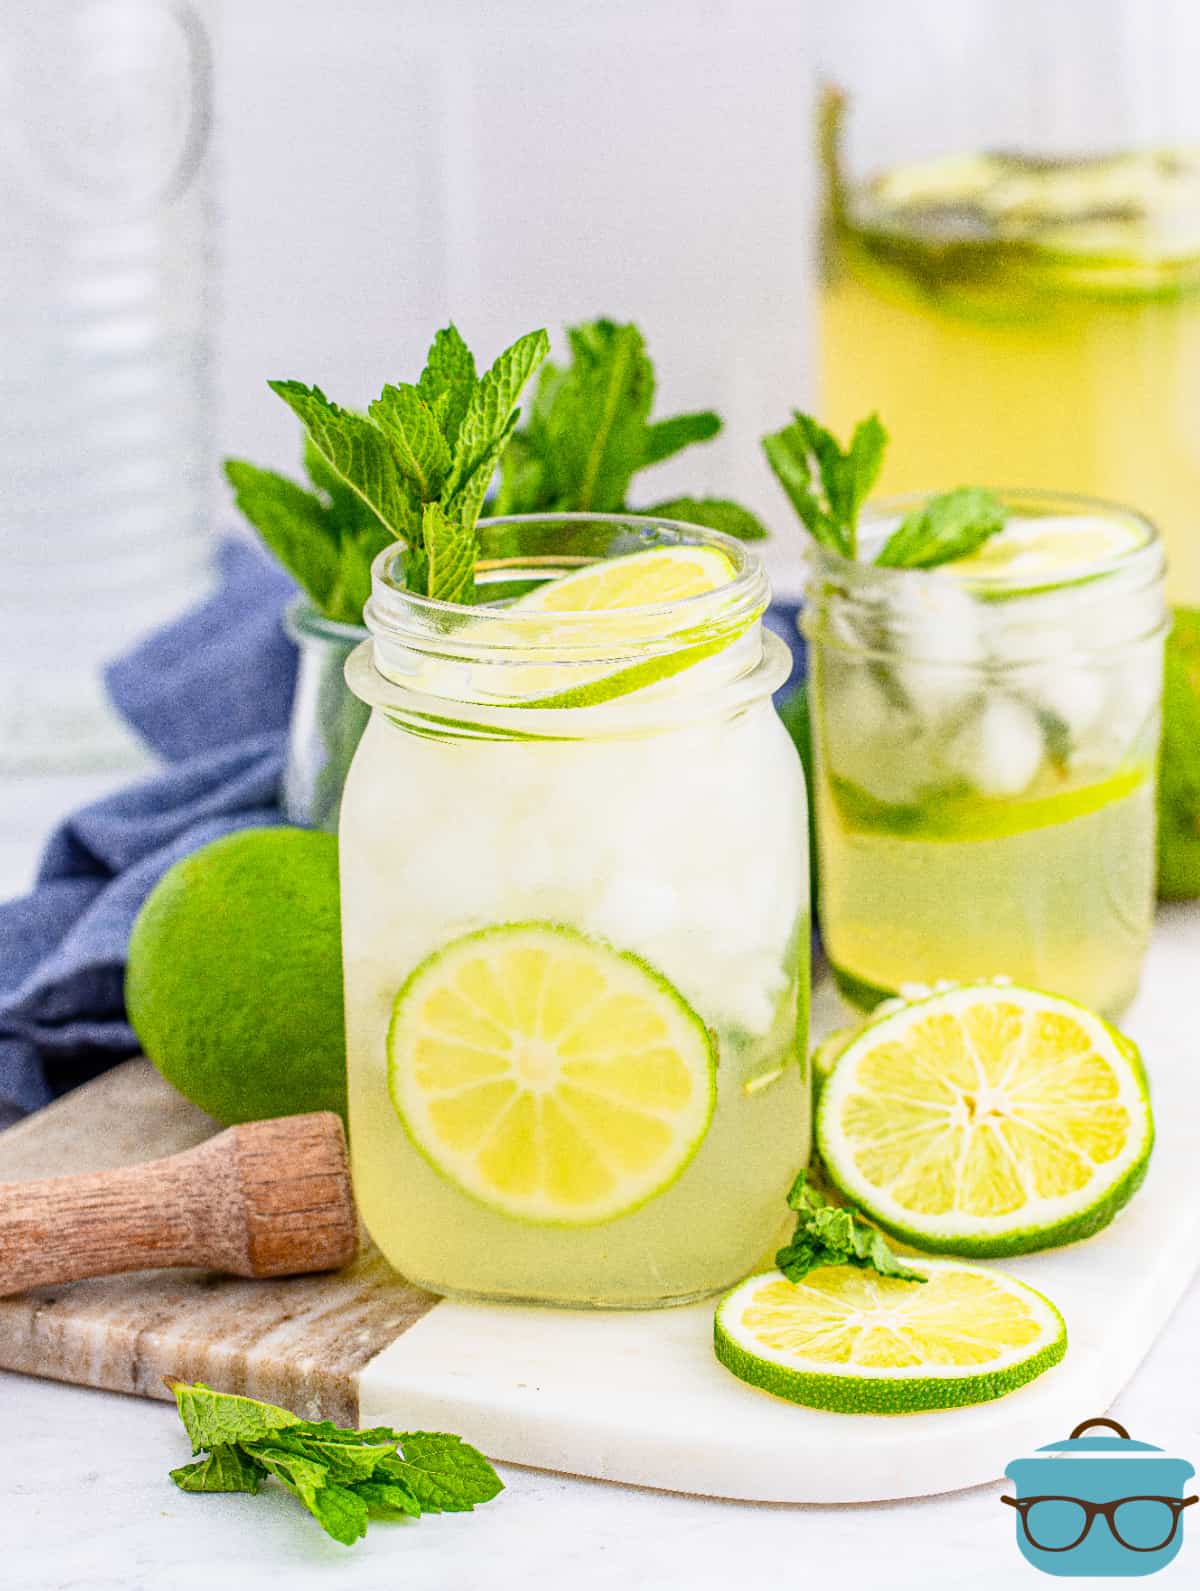 Summer Mojito Recipe in glass with pitcher with mint and lime garnishes.